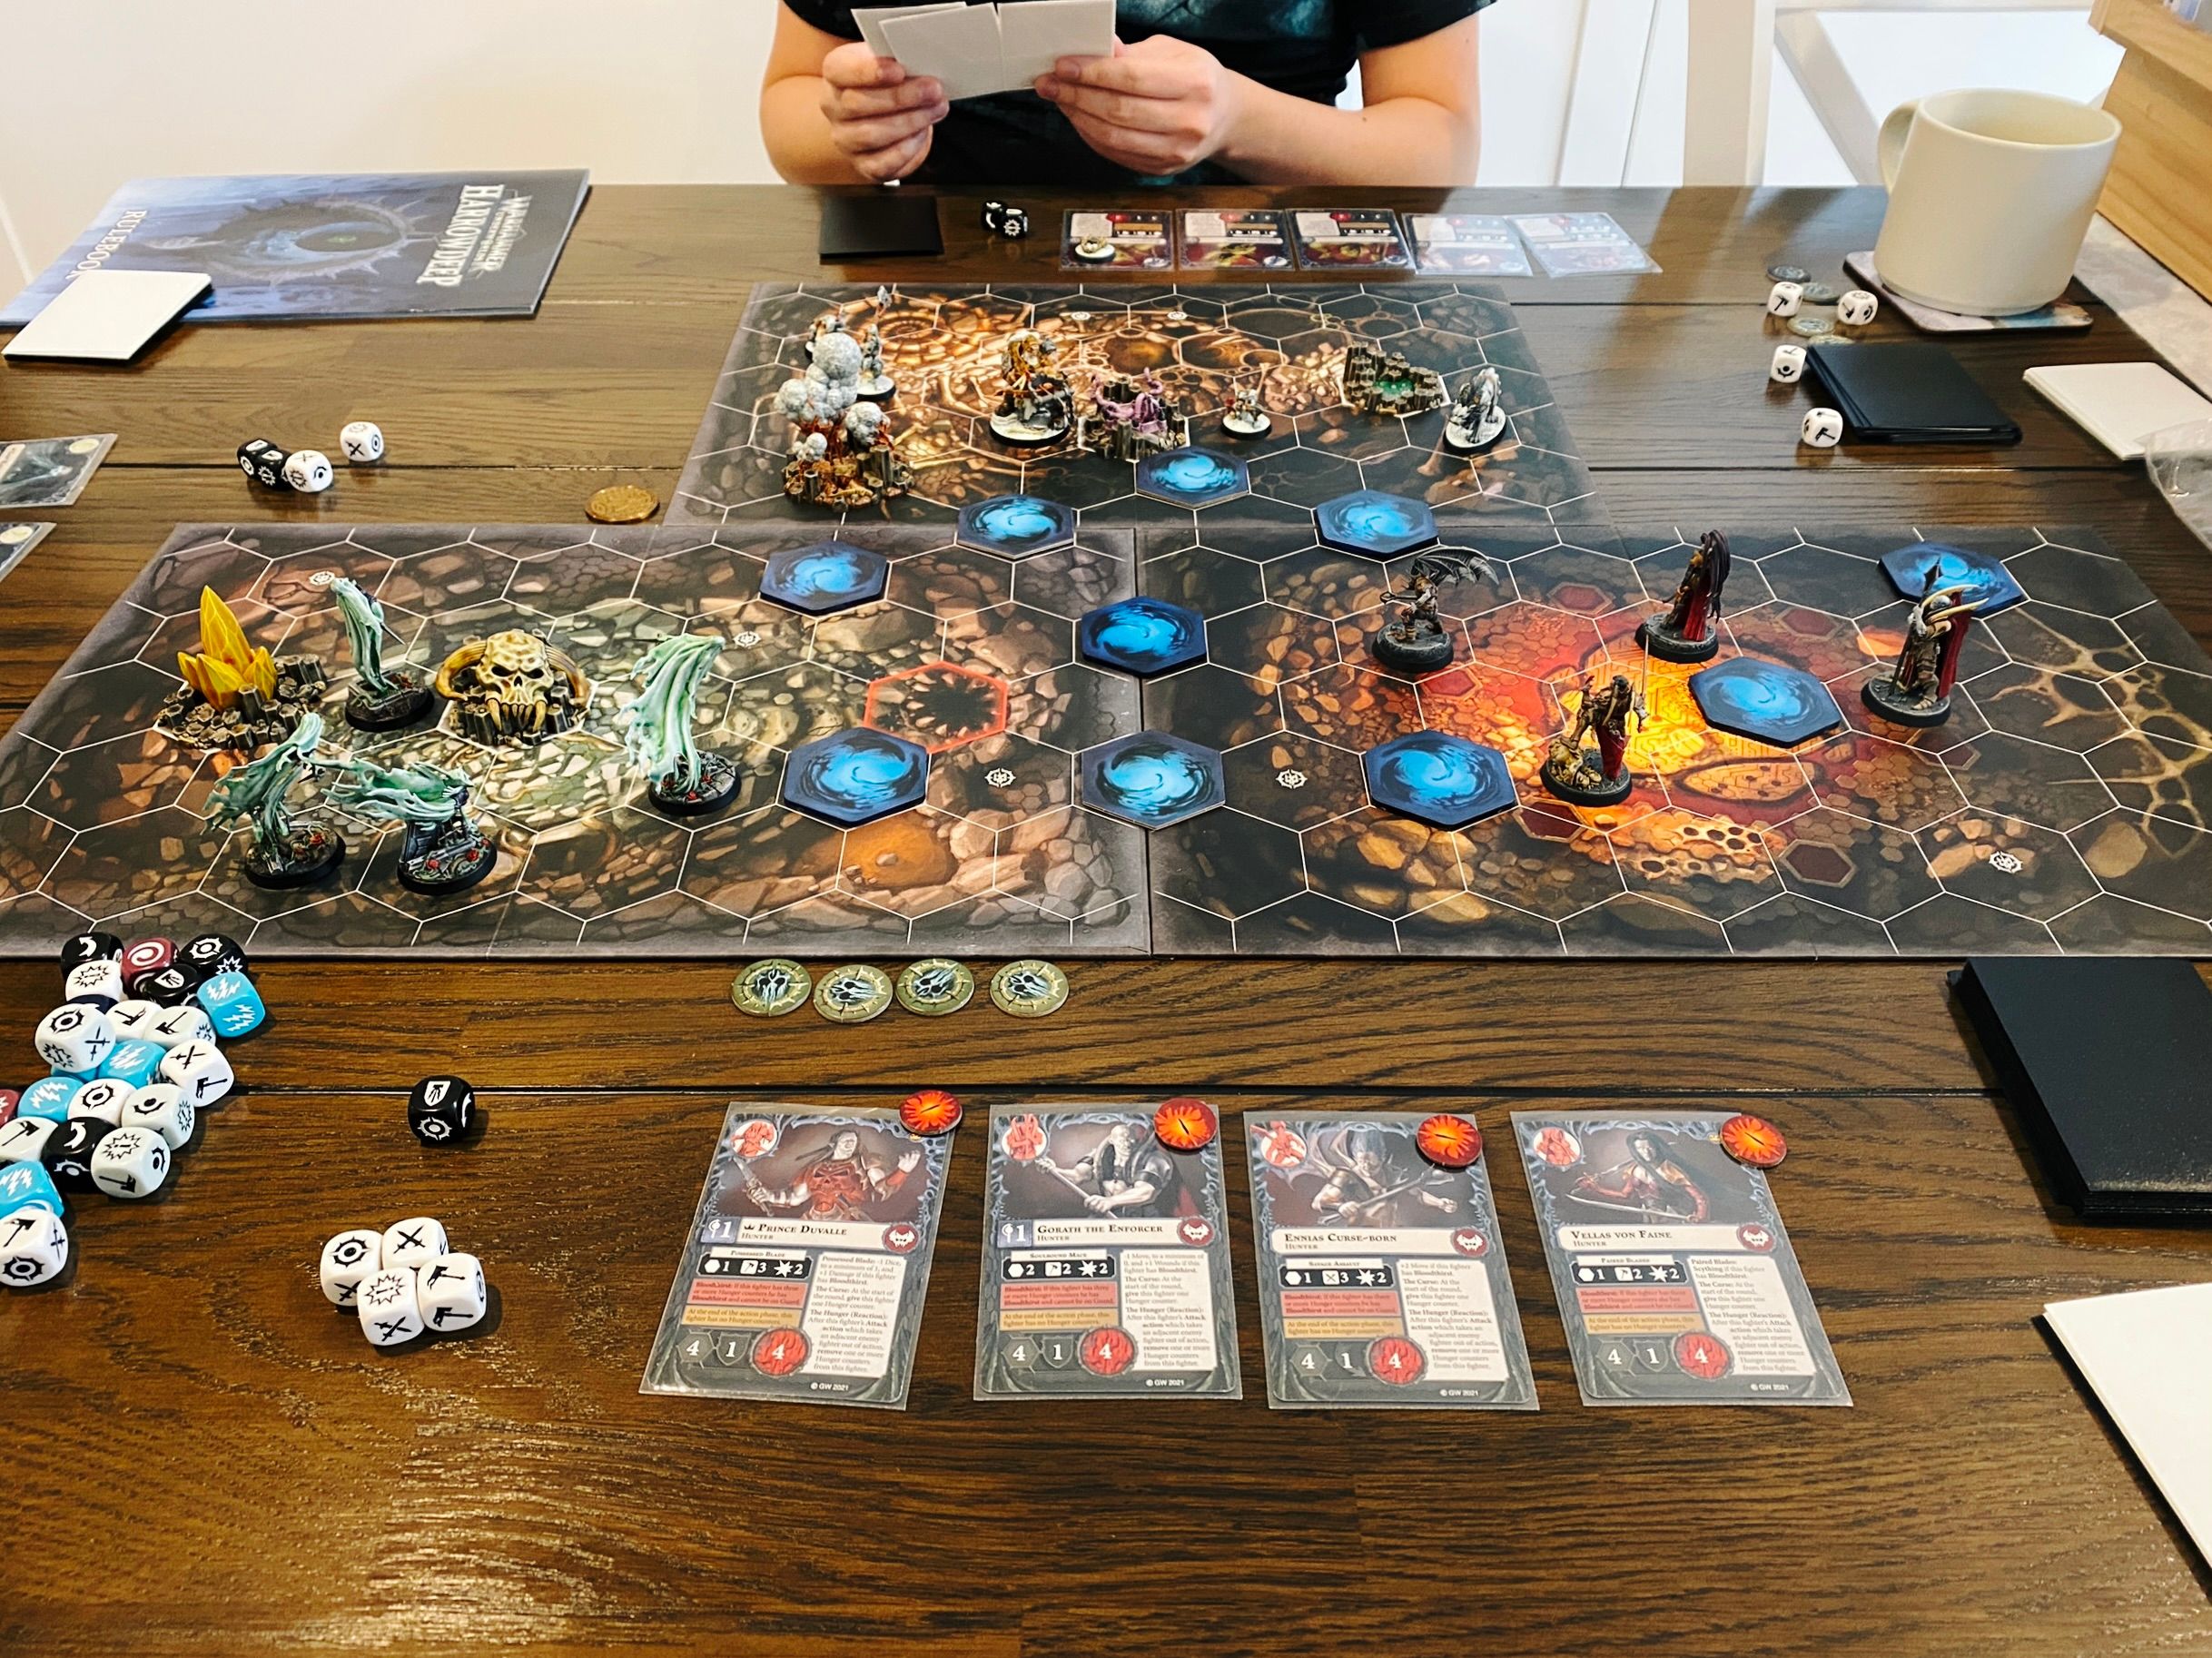 A photo of a three-player game of Warhammer Underworlds, a hex-based board game with miniatures and cards. Lady Harrow's Mournflight (four flowing spirits) are at the left, The Crimson Court (four elegant vampires in silver and bronze armour with red cloaks) are at the right, and across the other side of the board are Hrothgorn's Mantrappers (a huge ogre with a crossbow/bear trap launcher, a sabretooth tiger, and four goblins).